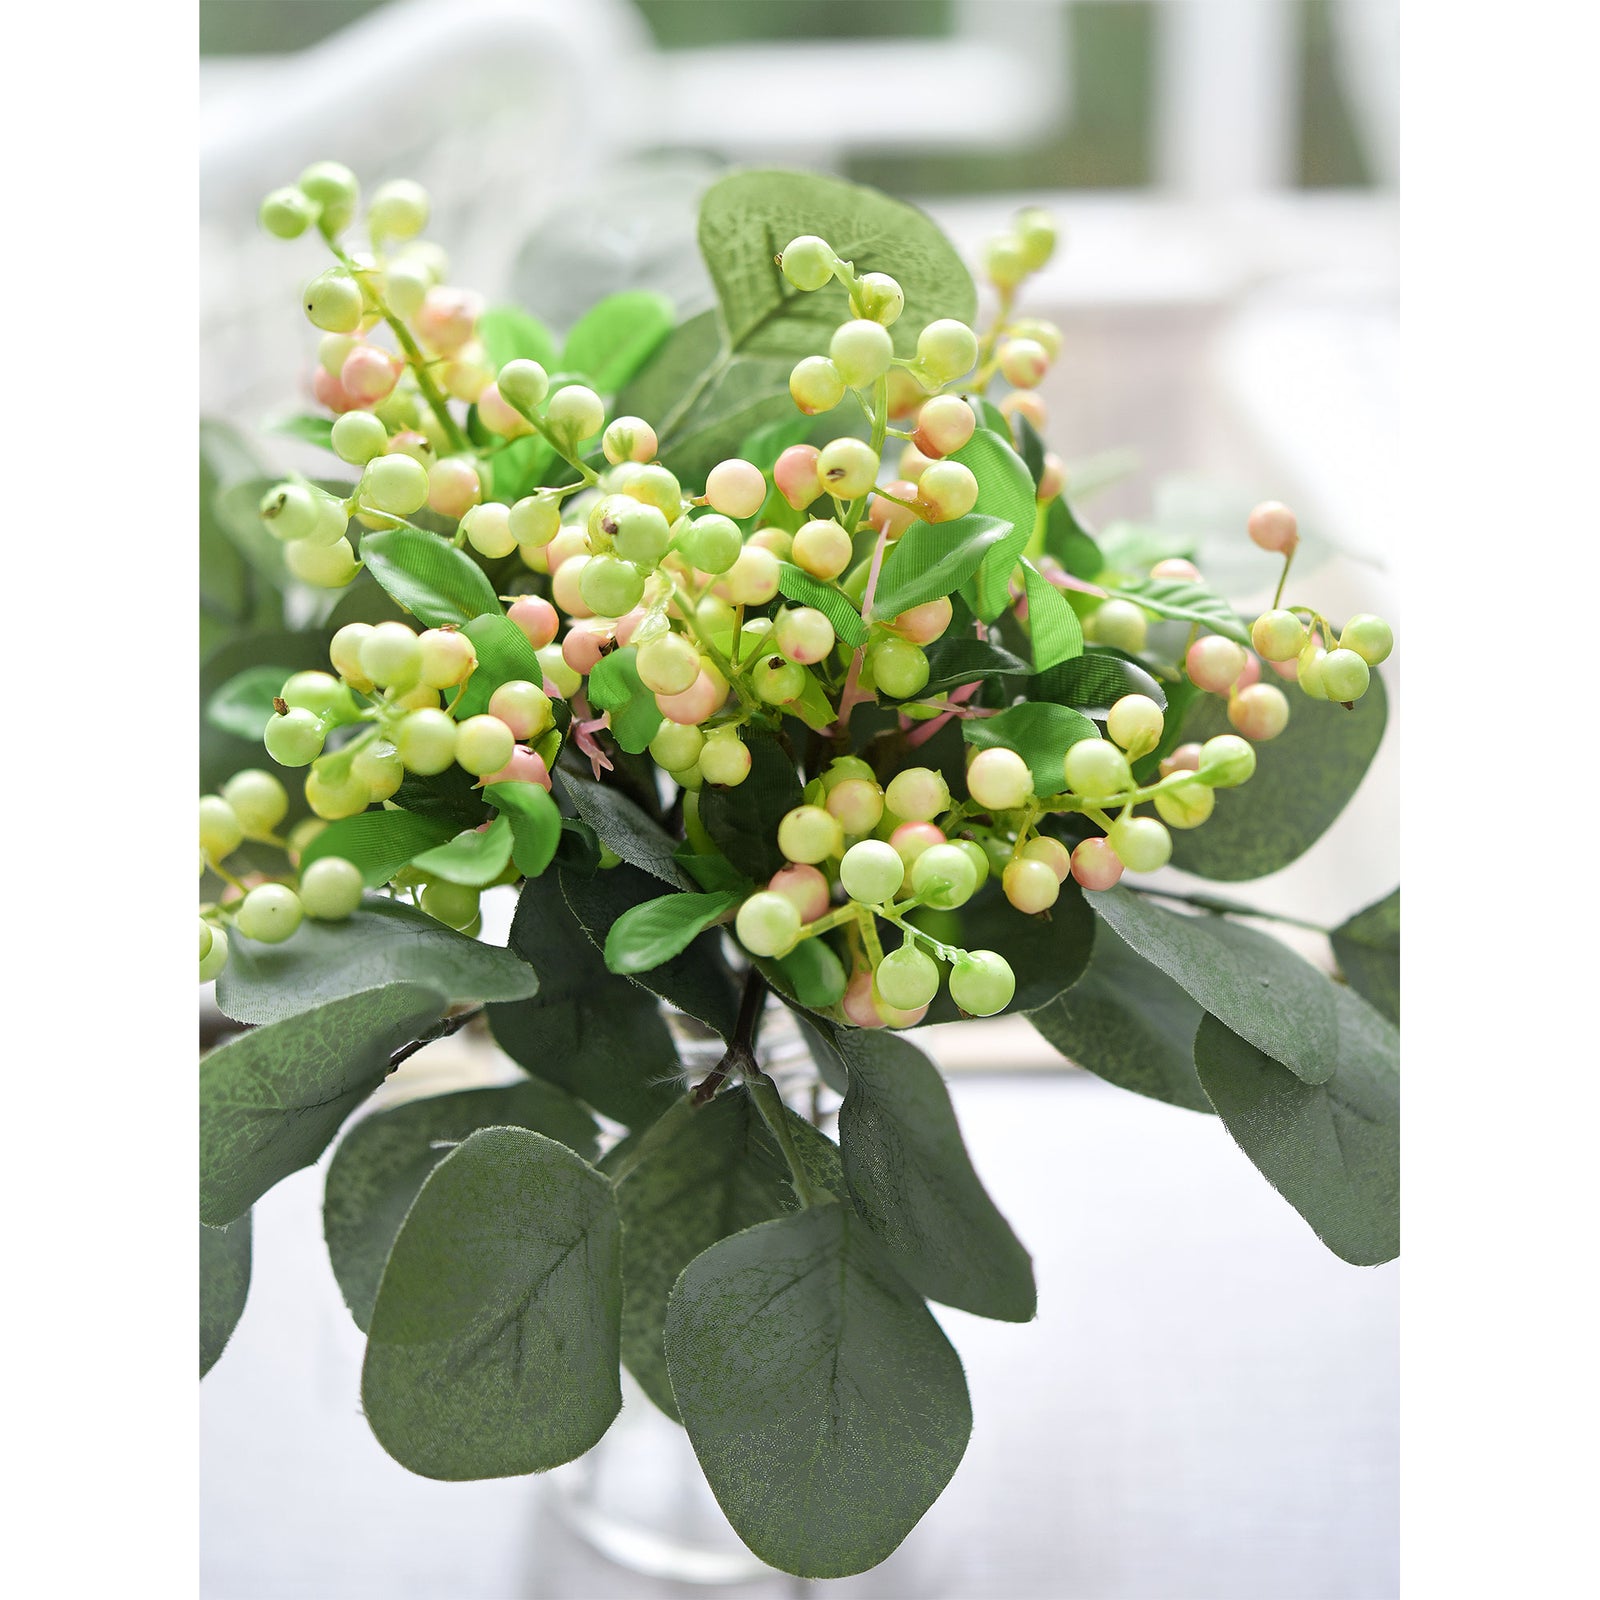 Versatile Artificial Holly Enchanted Meadow Berry Stems: Set of 10 for Stunning Decoration (White, Green and Pink)